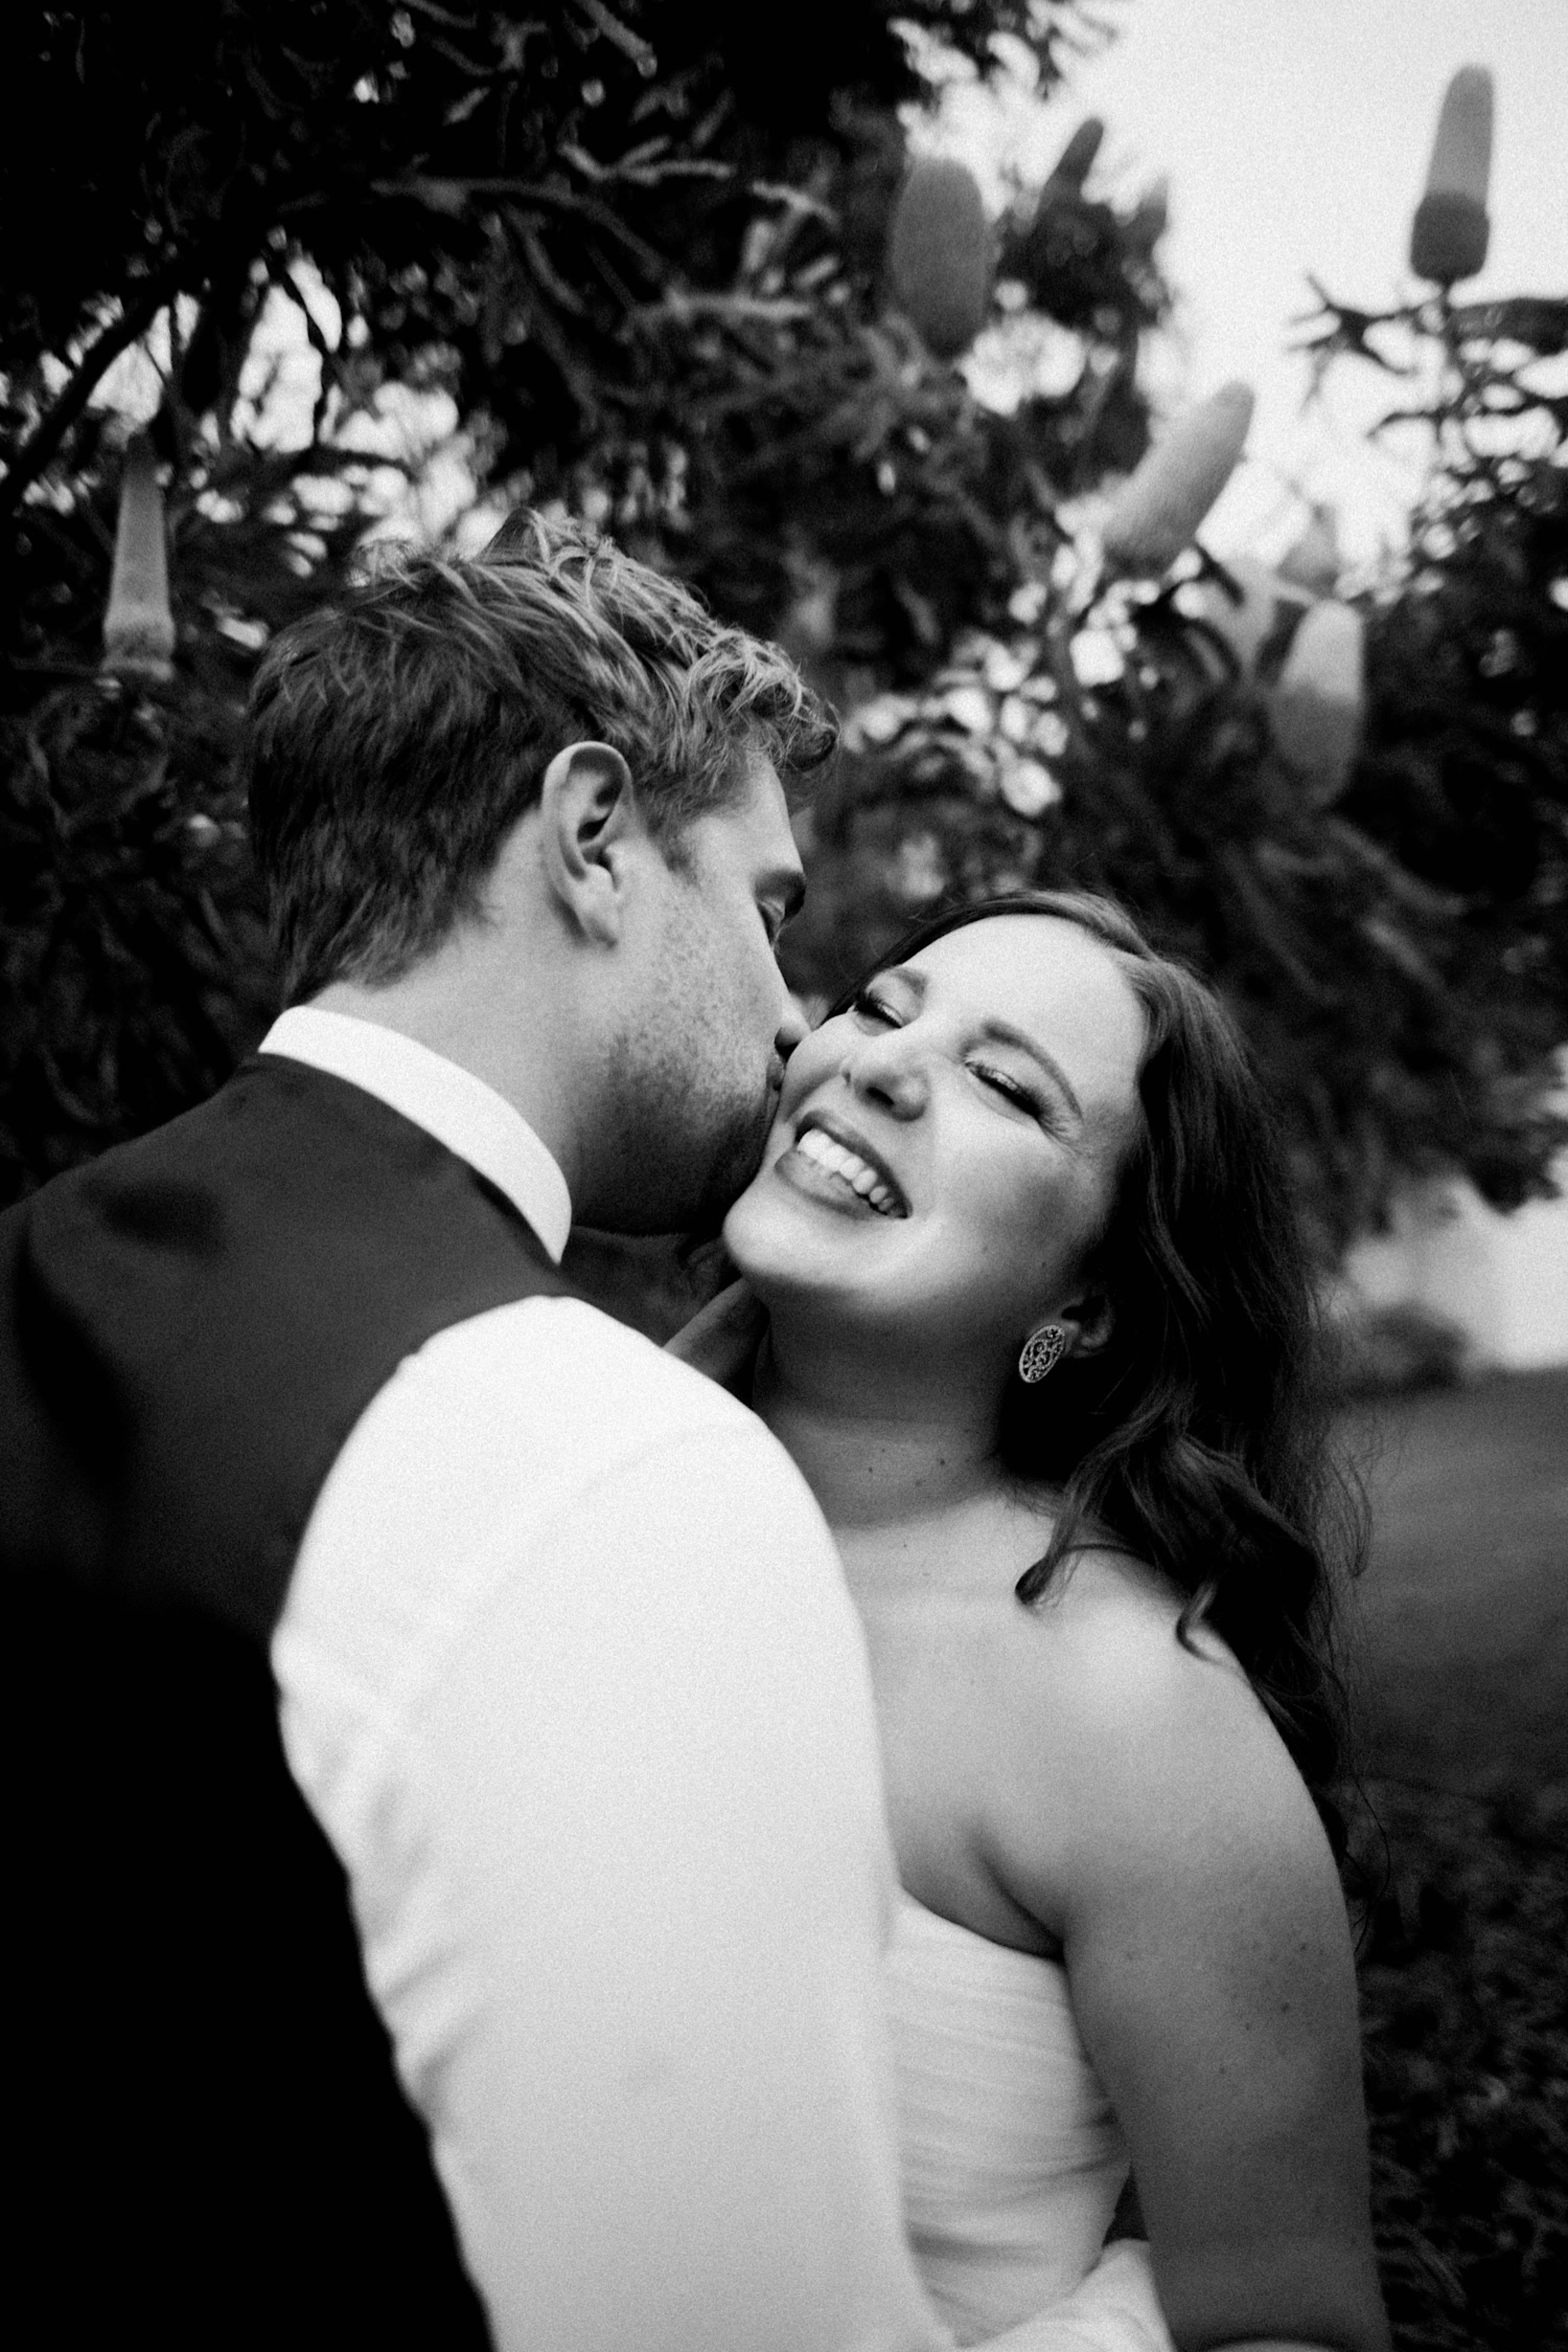 A black & white candid wedding portrait of the groom kissing the bride on the cheek while she laughs..